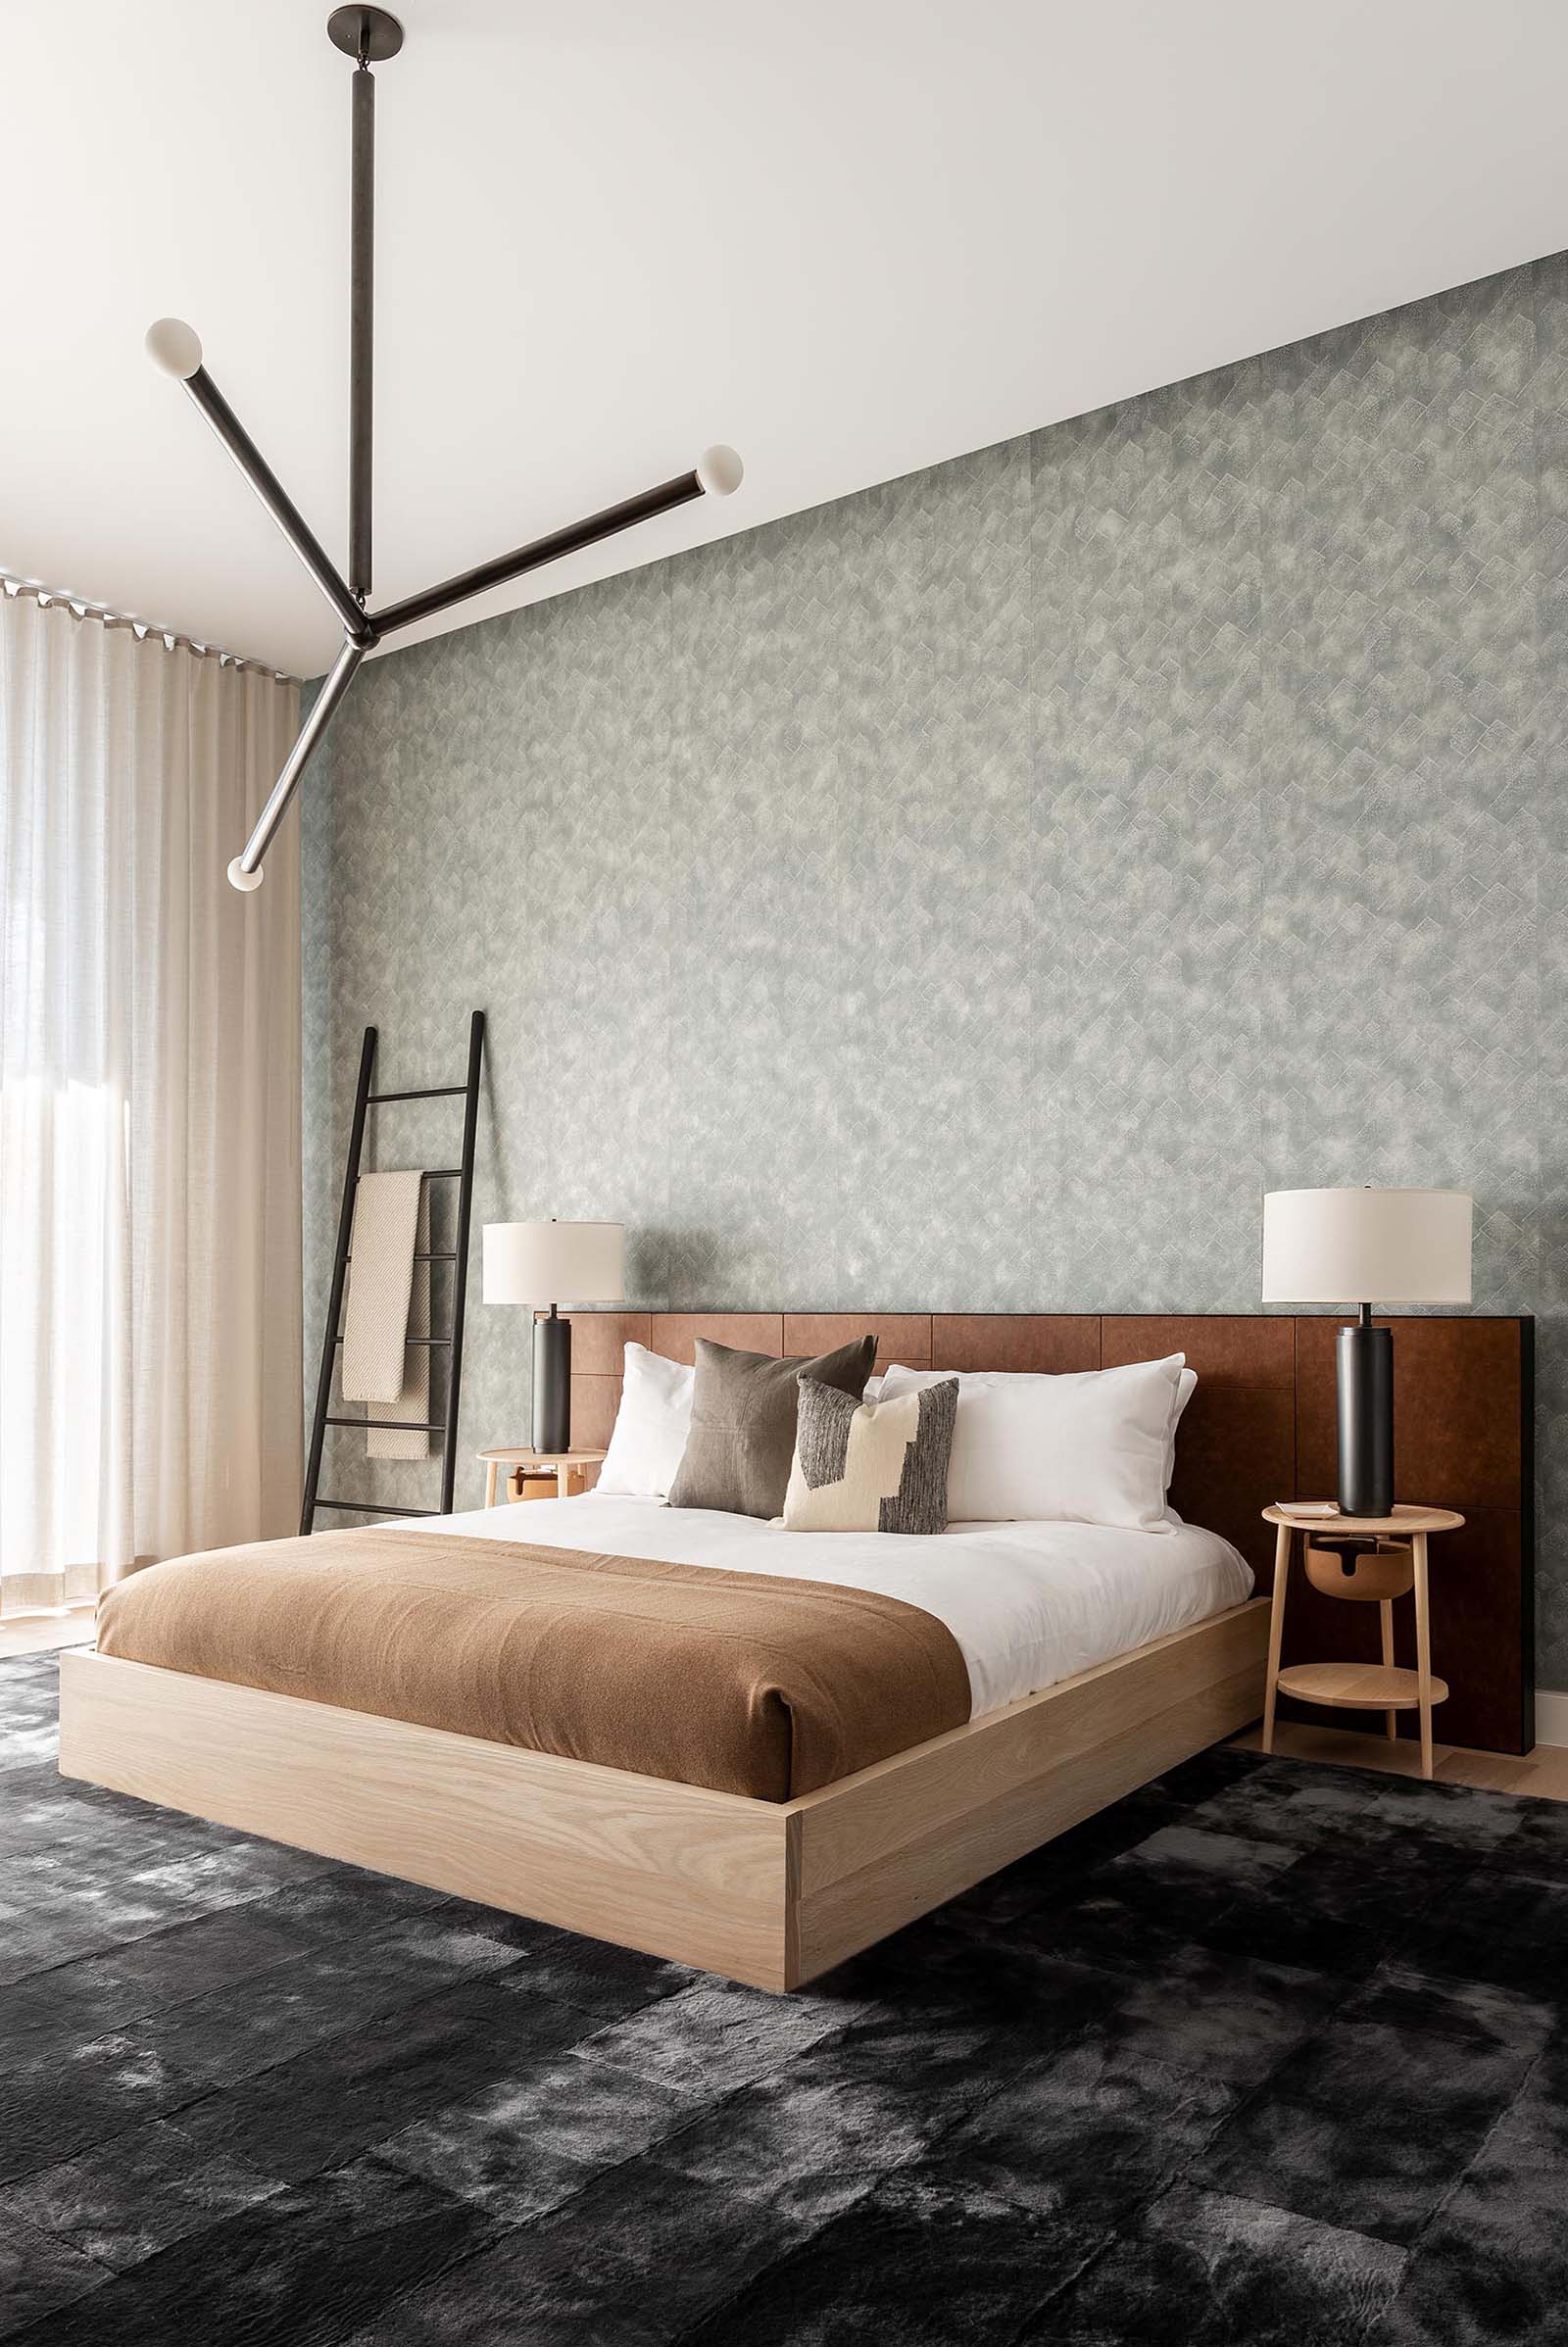 In this modern bedroom, there's a muted gray wallpaper that covers the entire wall, creating a backdrop for the bed, while minimalist pendant light hangs from the ceiling, and a matte black ladder provides a place to hang blankets.